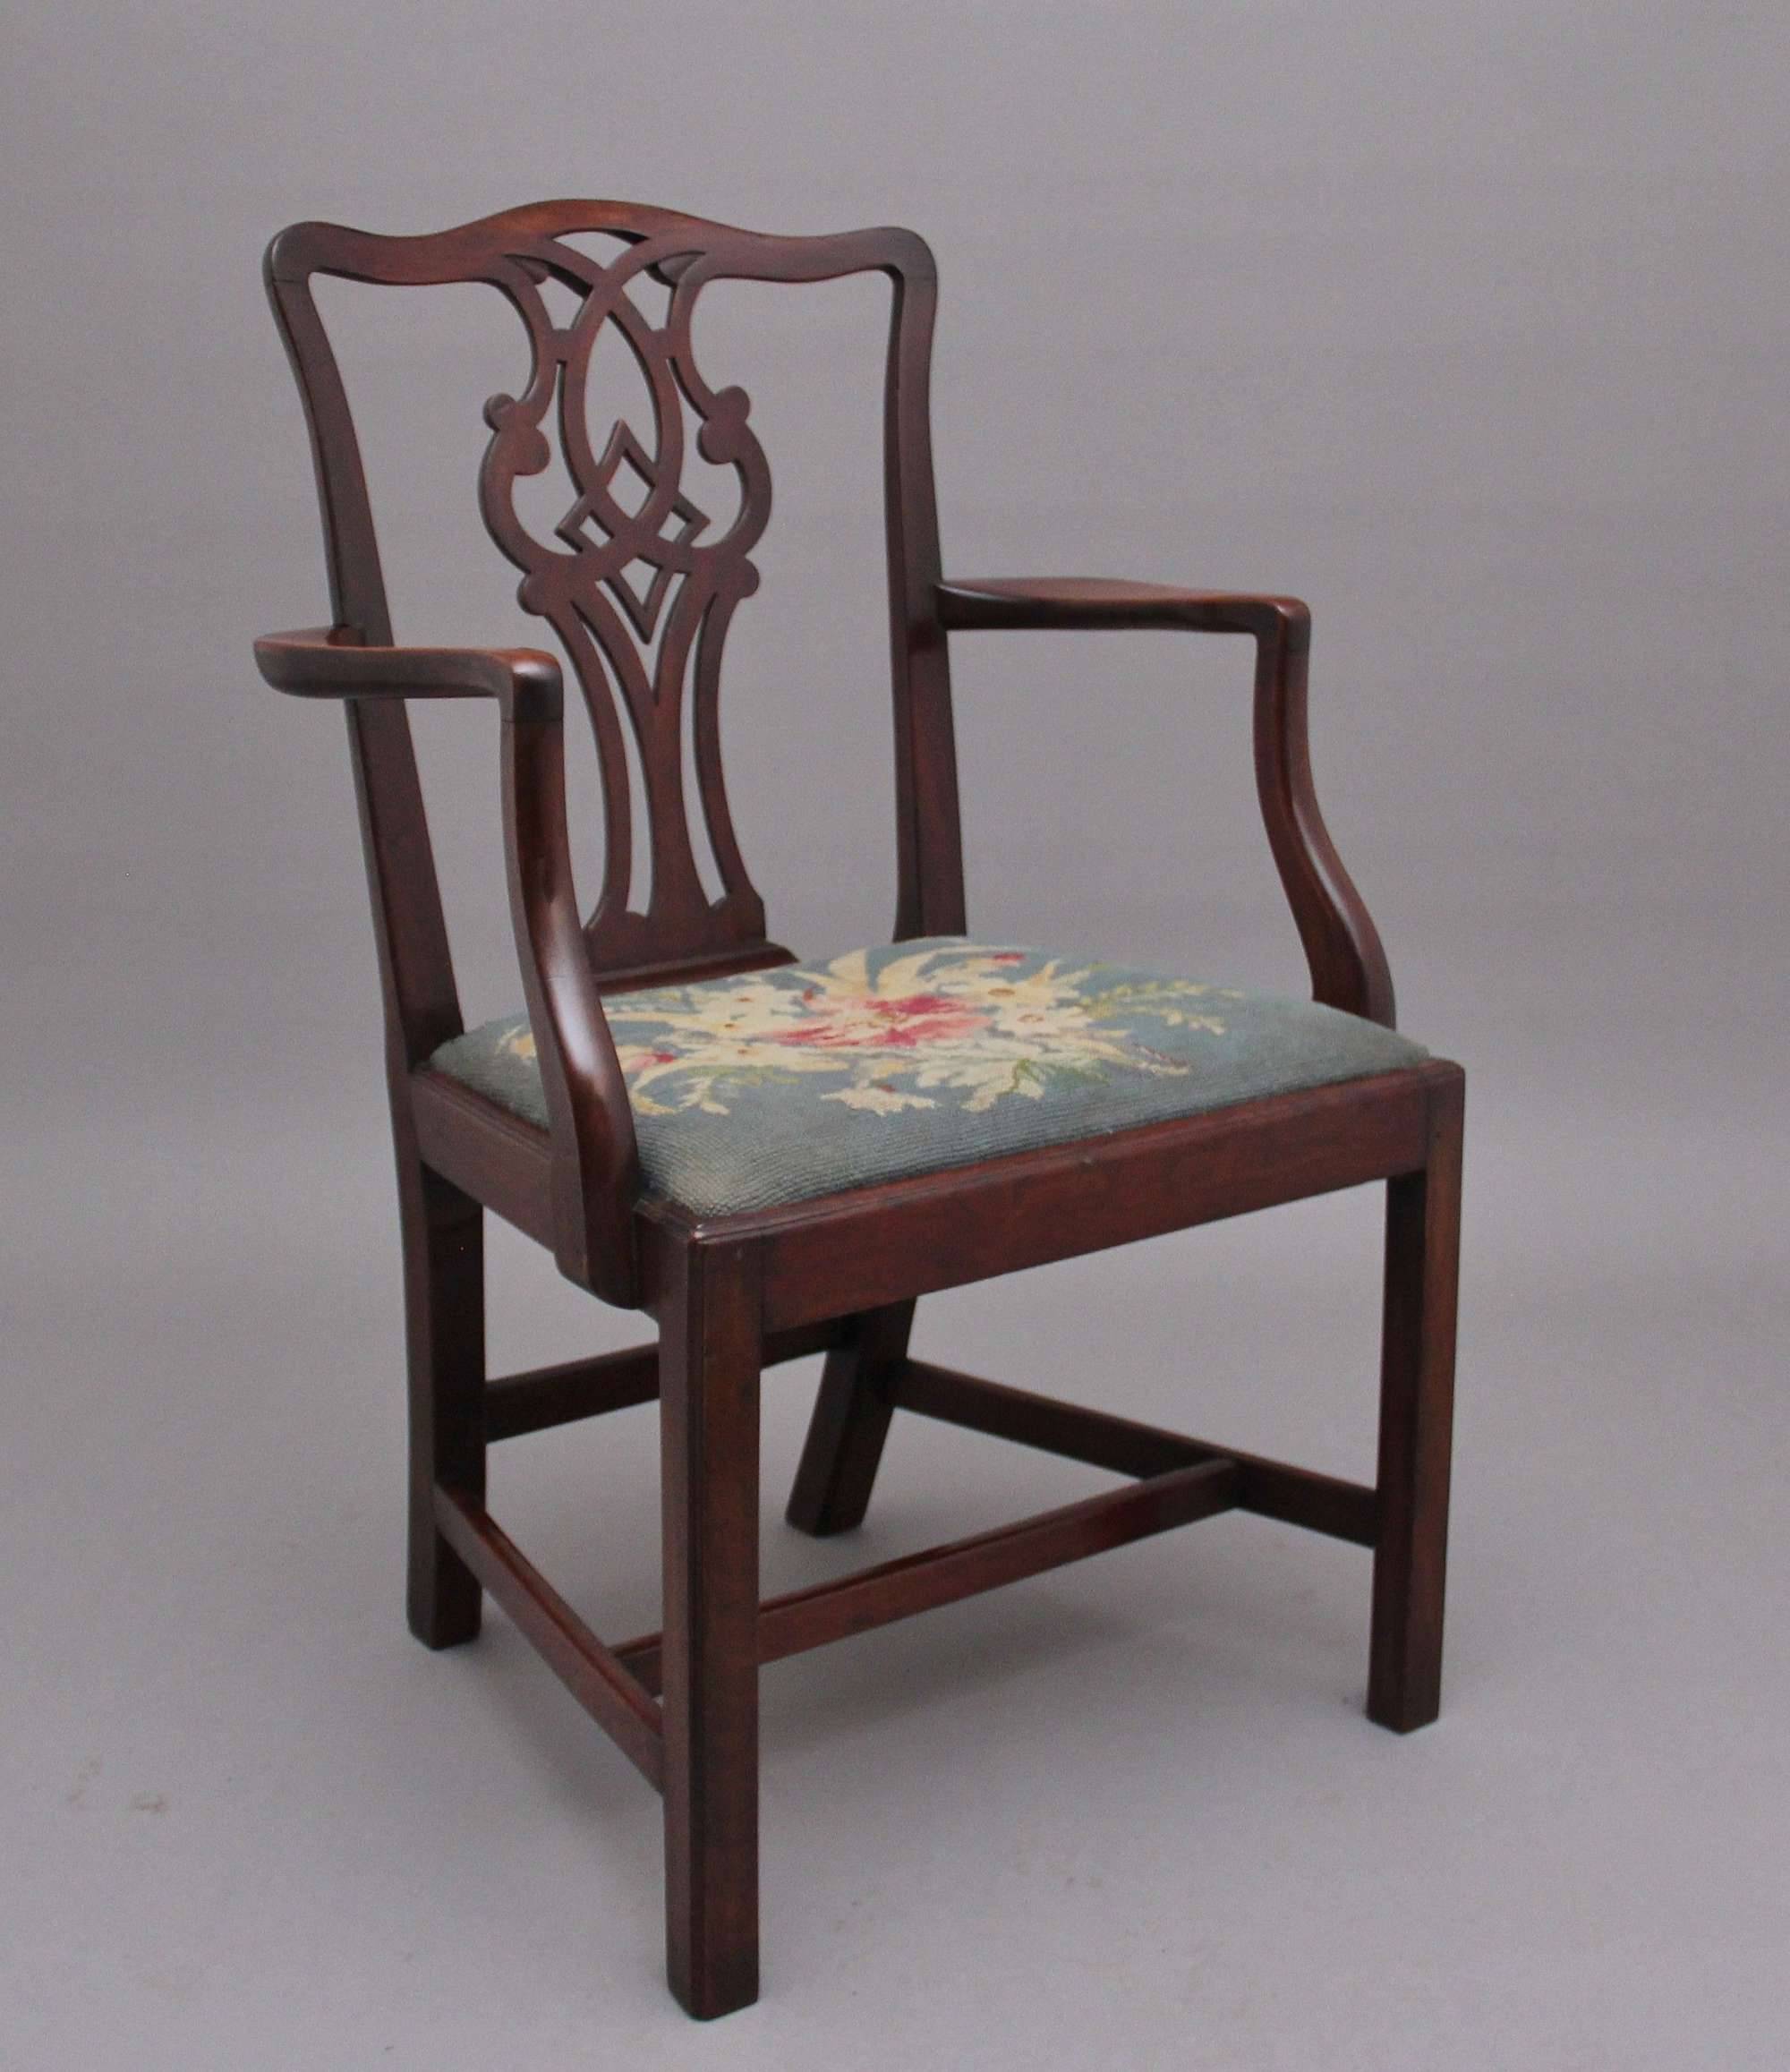 19th Century Mahogany Antique Armchair In The Chippendale Style